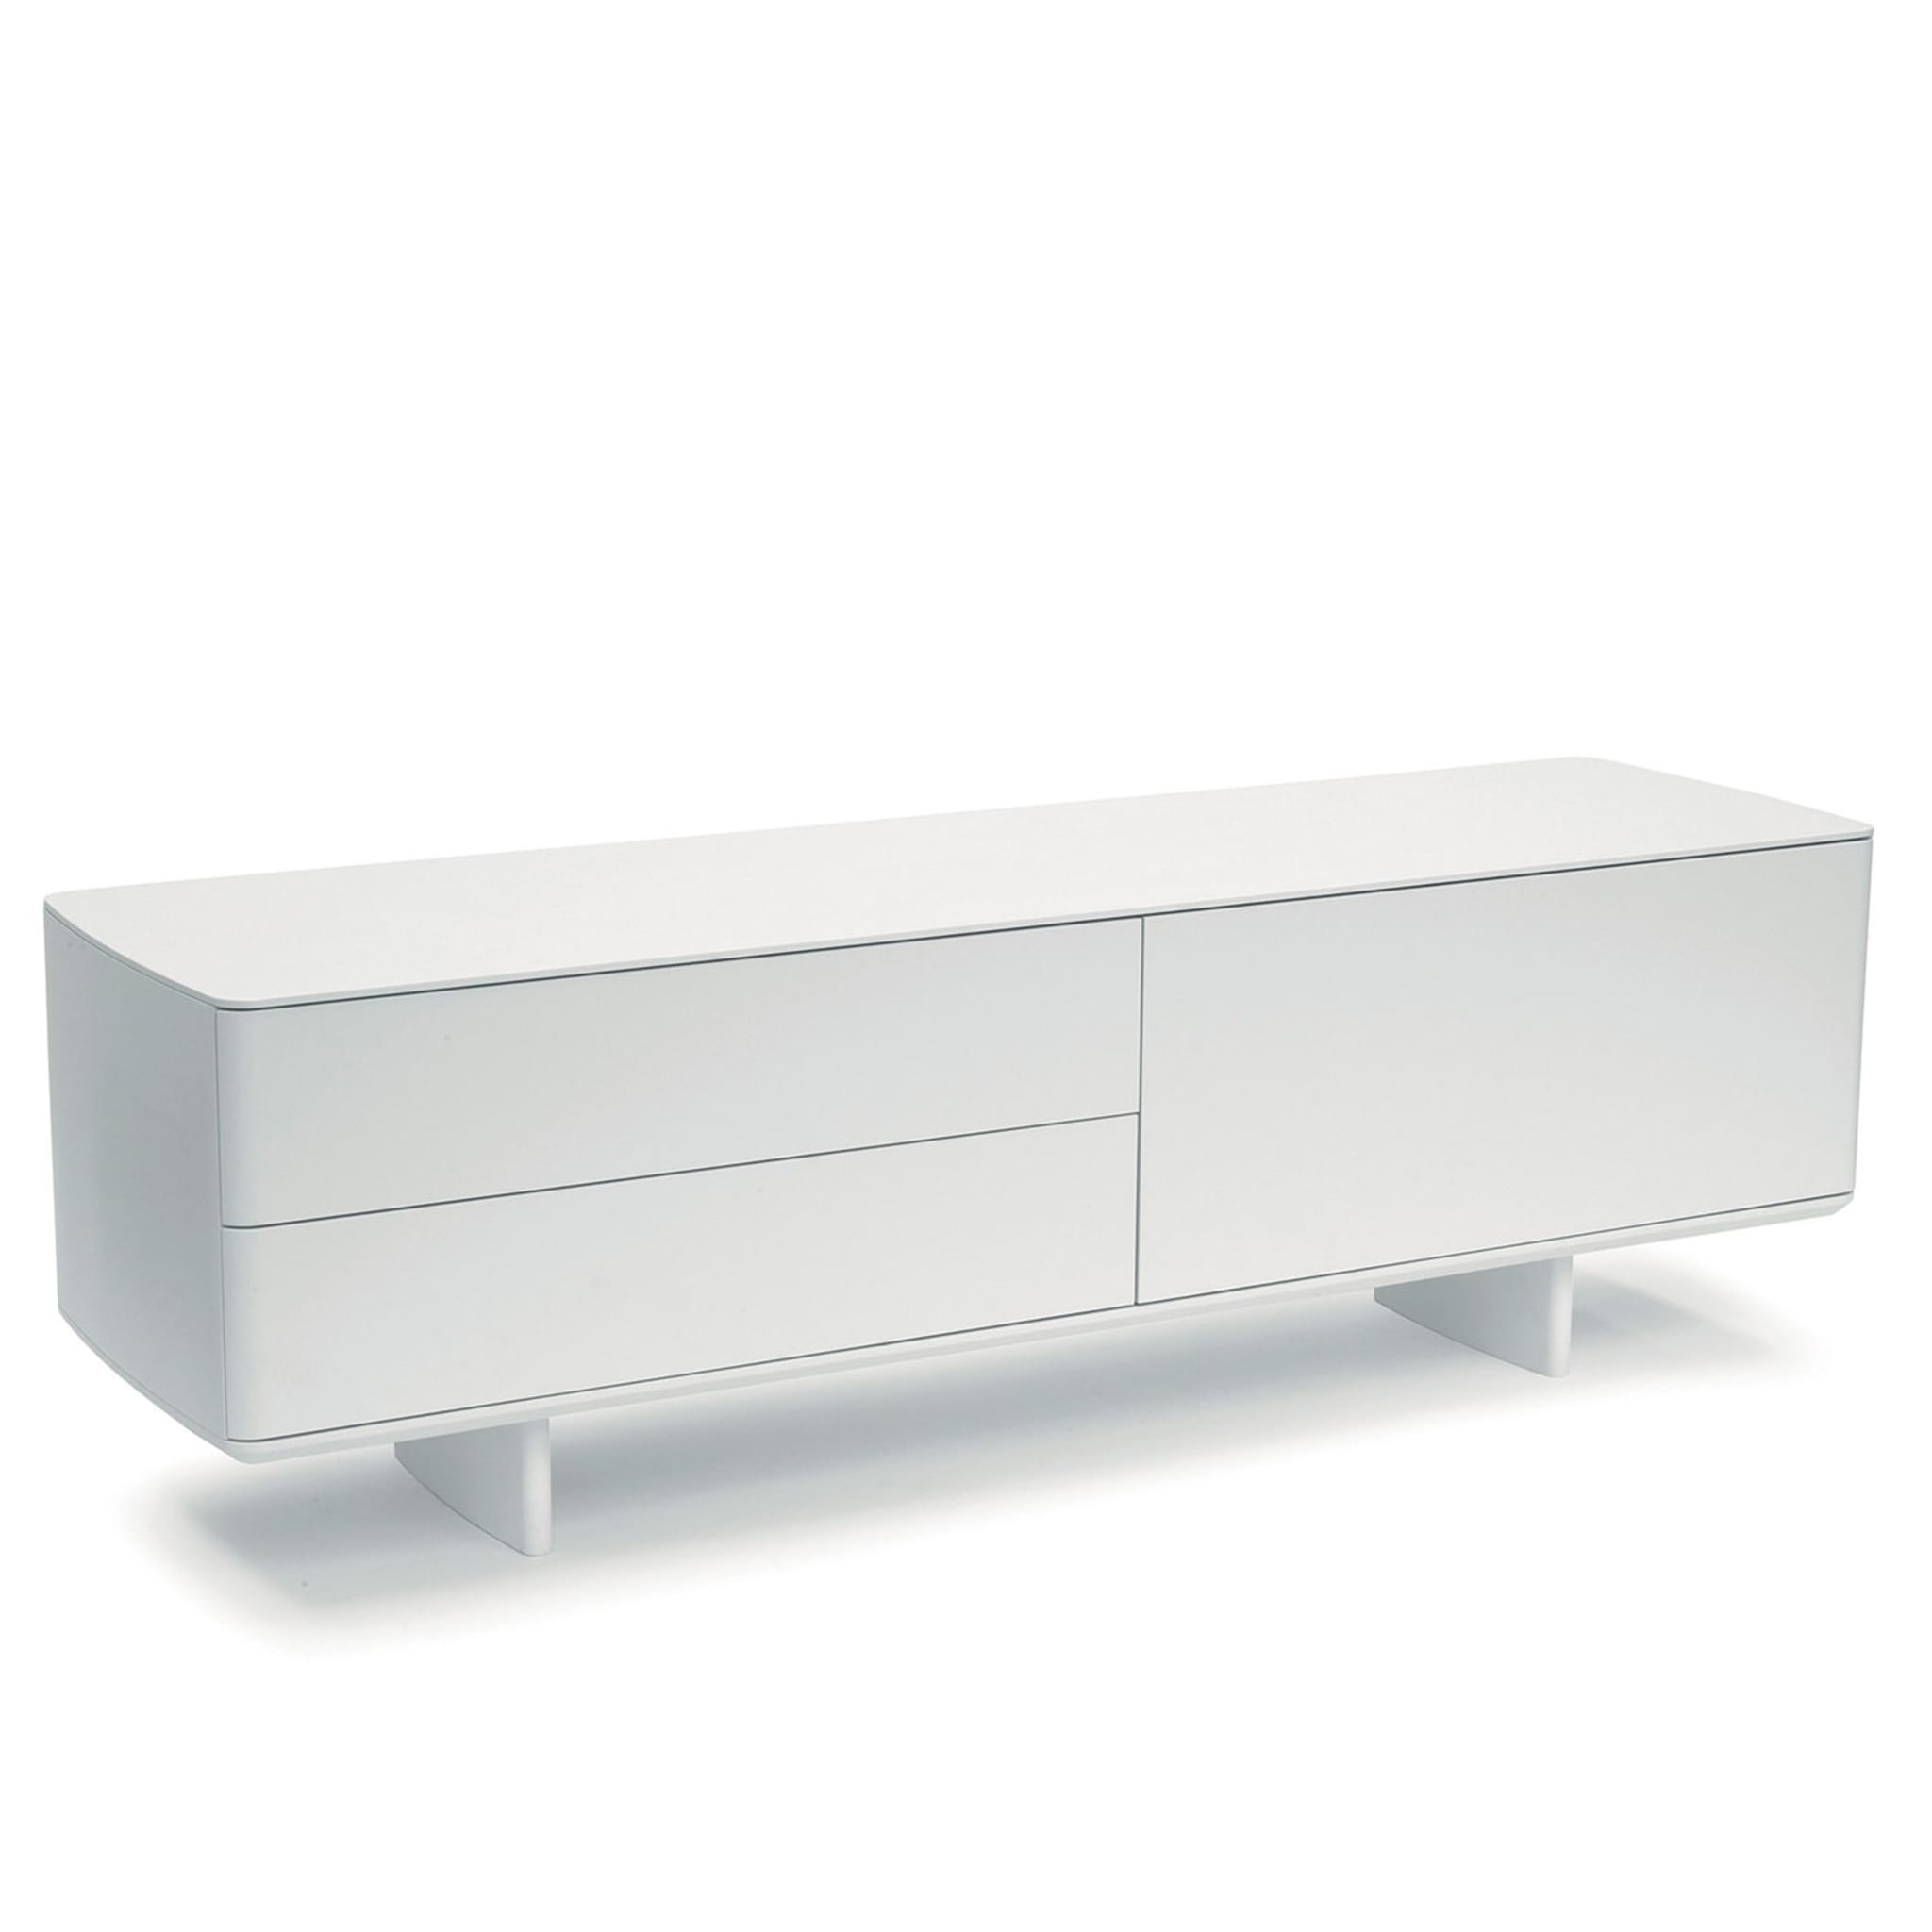 Shift White Sideboard by Foster + Partners - Alternative view 1